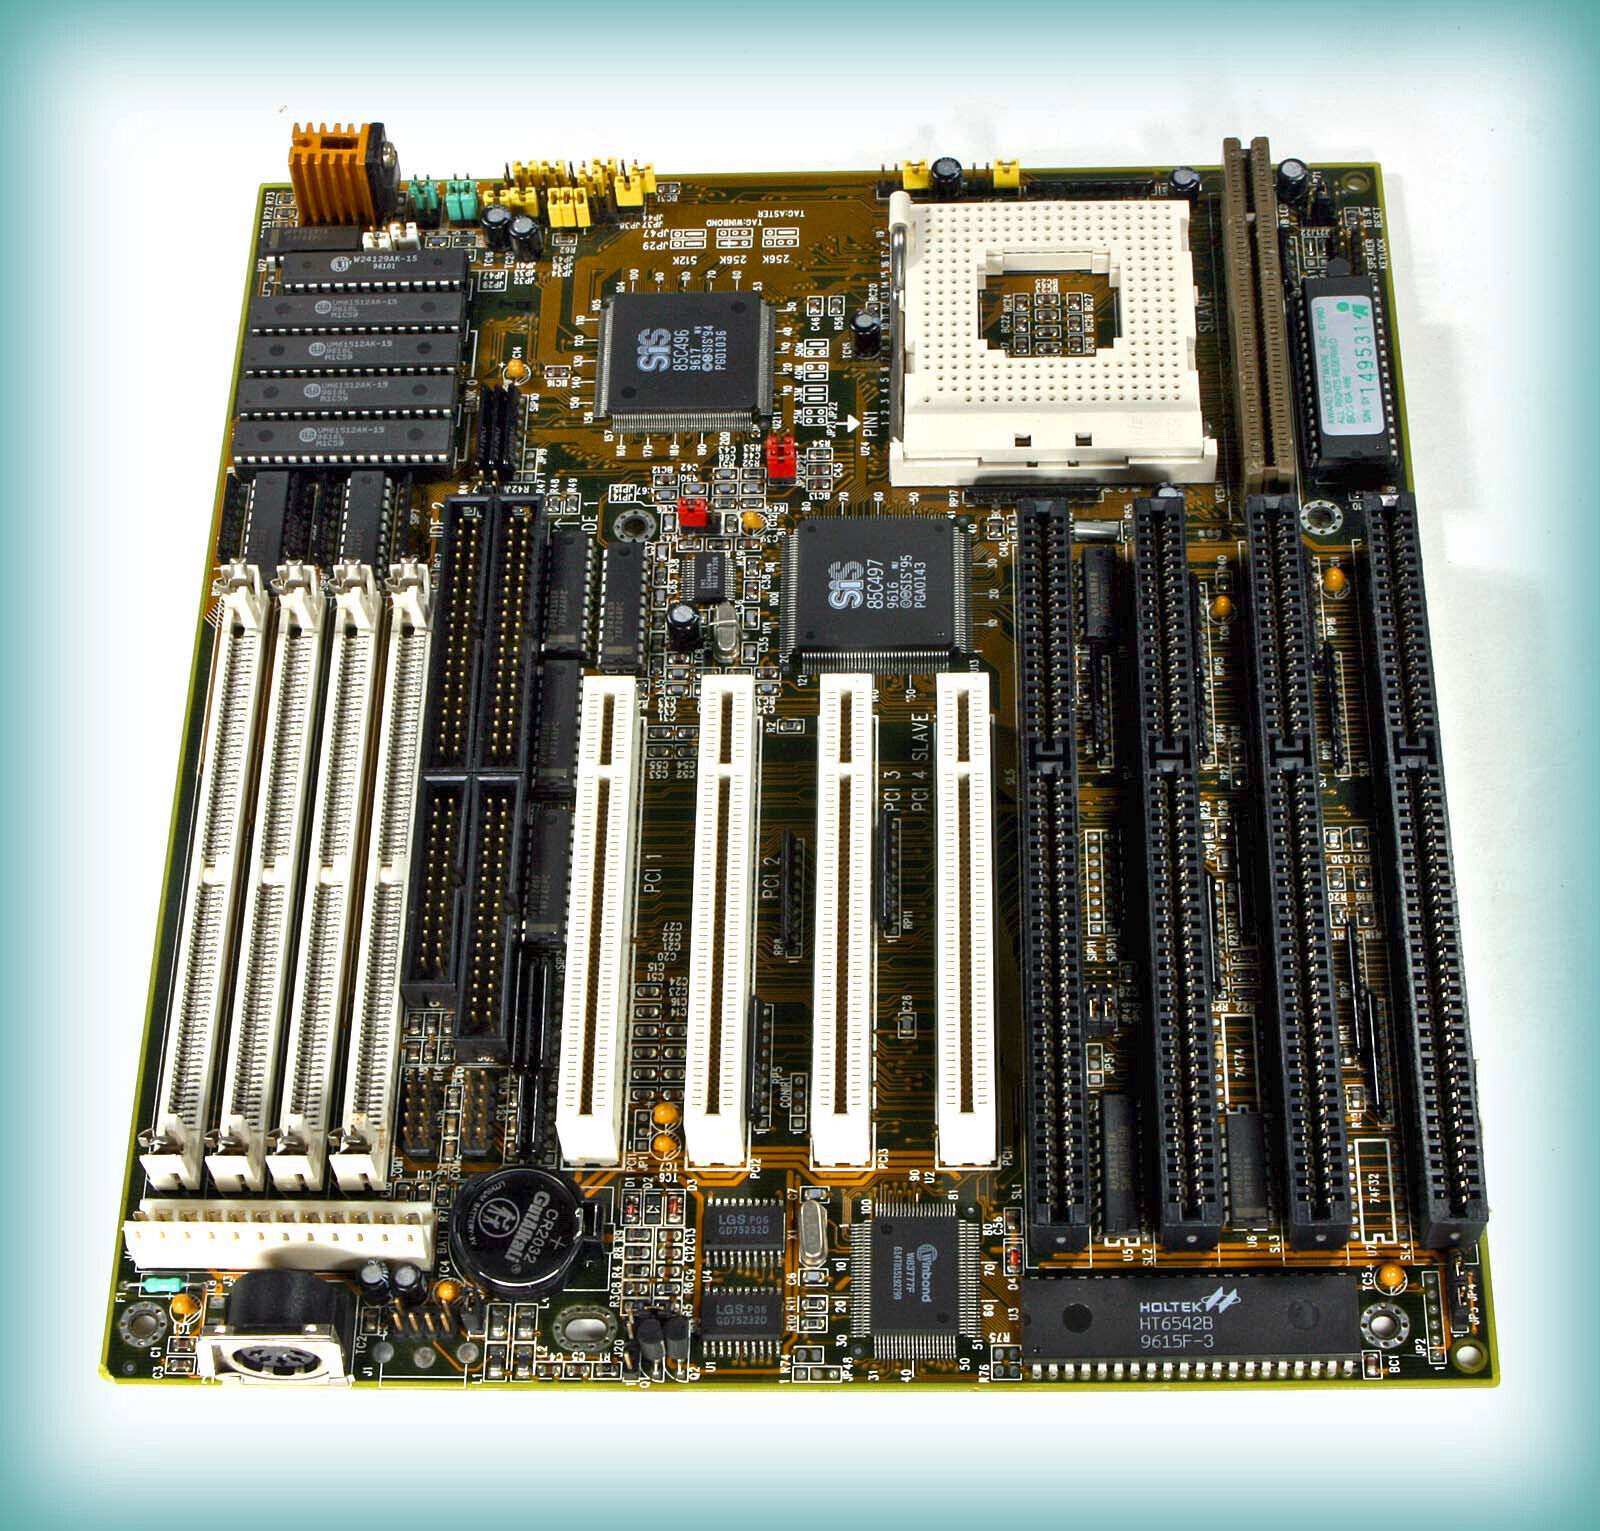 Vintage Soyo 4SAW2 AT Motherboard 486 DX4 ISA/VLB/PCI,PS2— EVEN BETTER THAN NEW